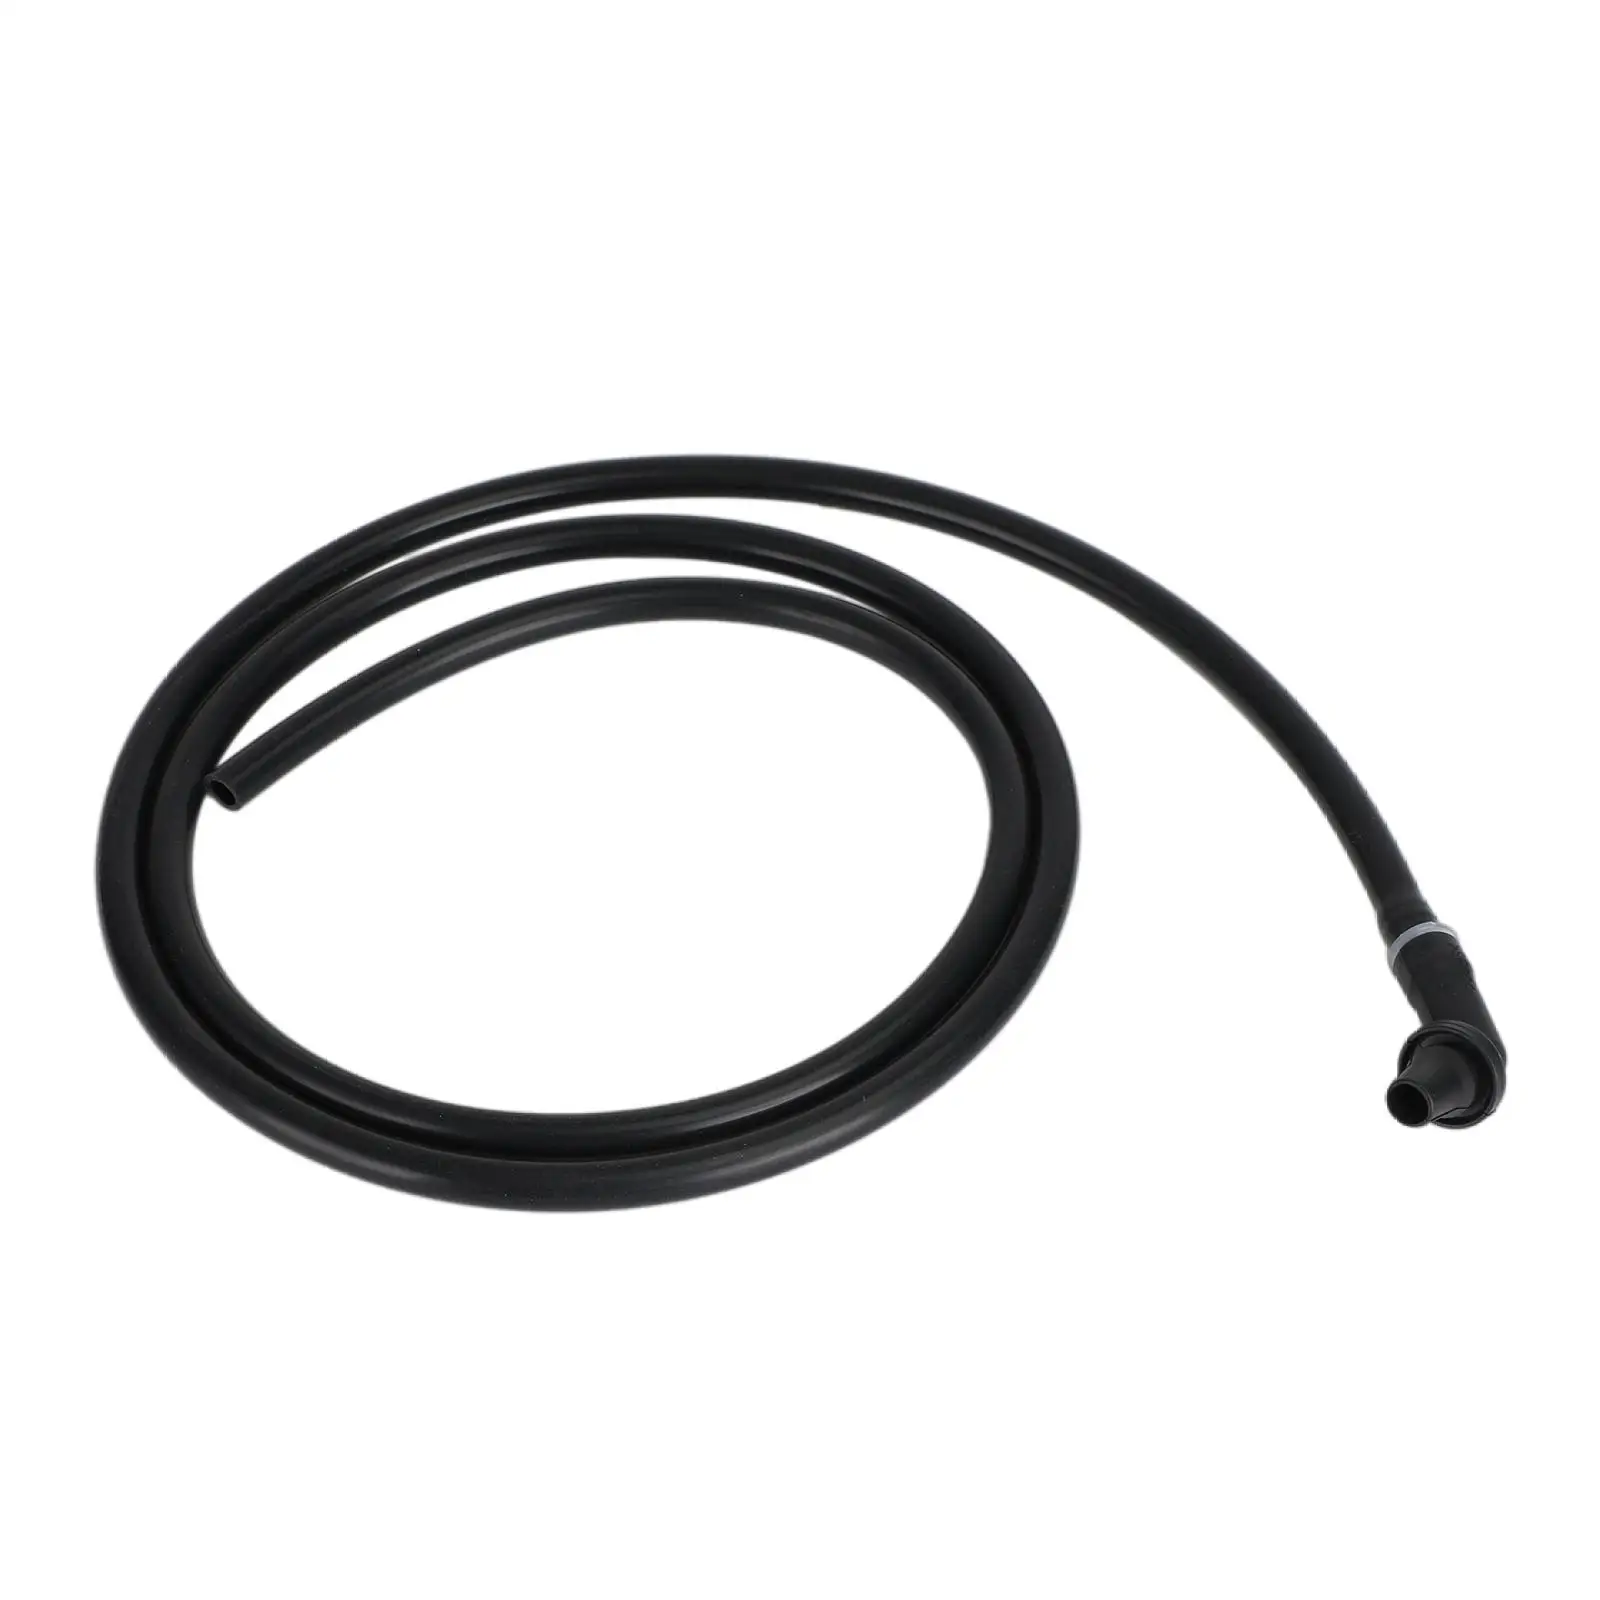 Sunroof Front Drain Hose Water Tube Eeh500100 Black for Landrover Discovery 3 4 for LR4 2010-2016 Accessories Direct Replaces